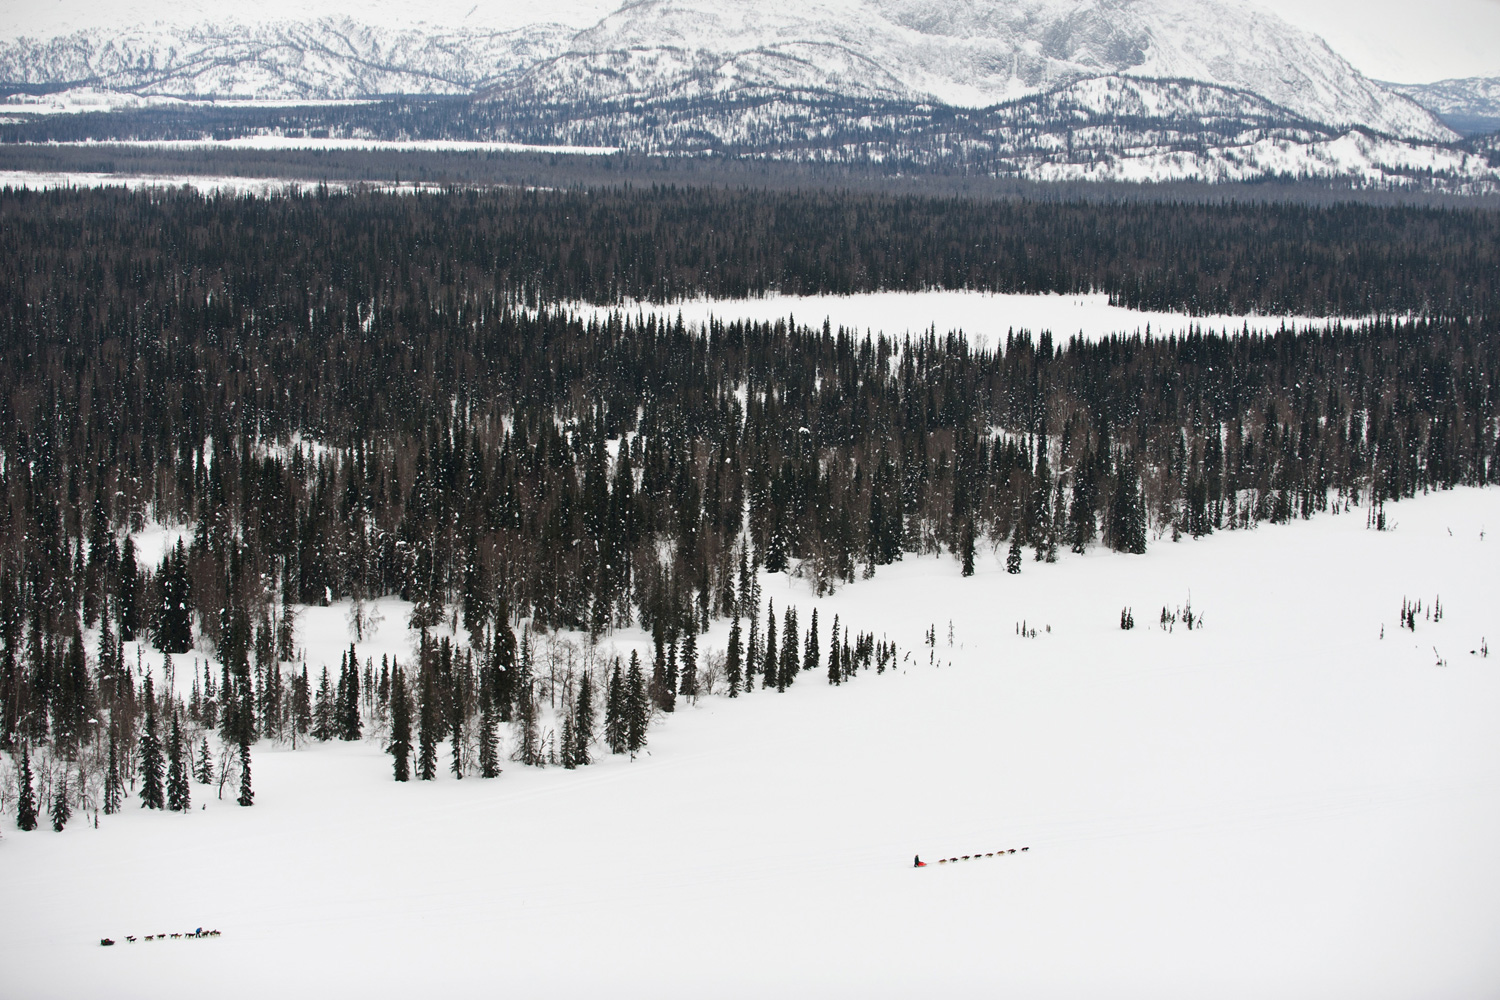 March 5, 2012. Two teams competing in the Iditarod Trail Sled Dog Race drive between the Skwentna and Finger Lake checkpoints in Alaska heading toward the Alaska Mountain Range.